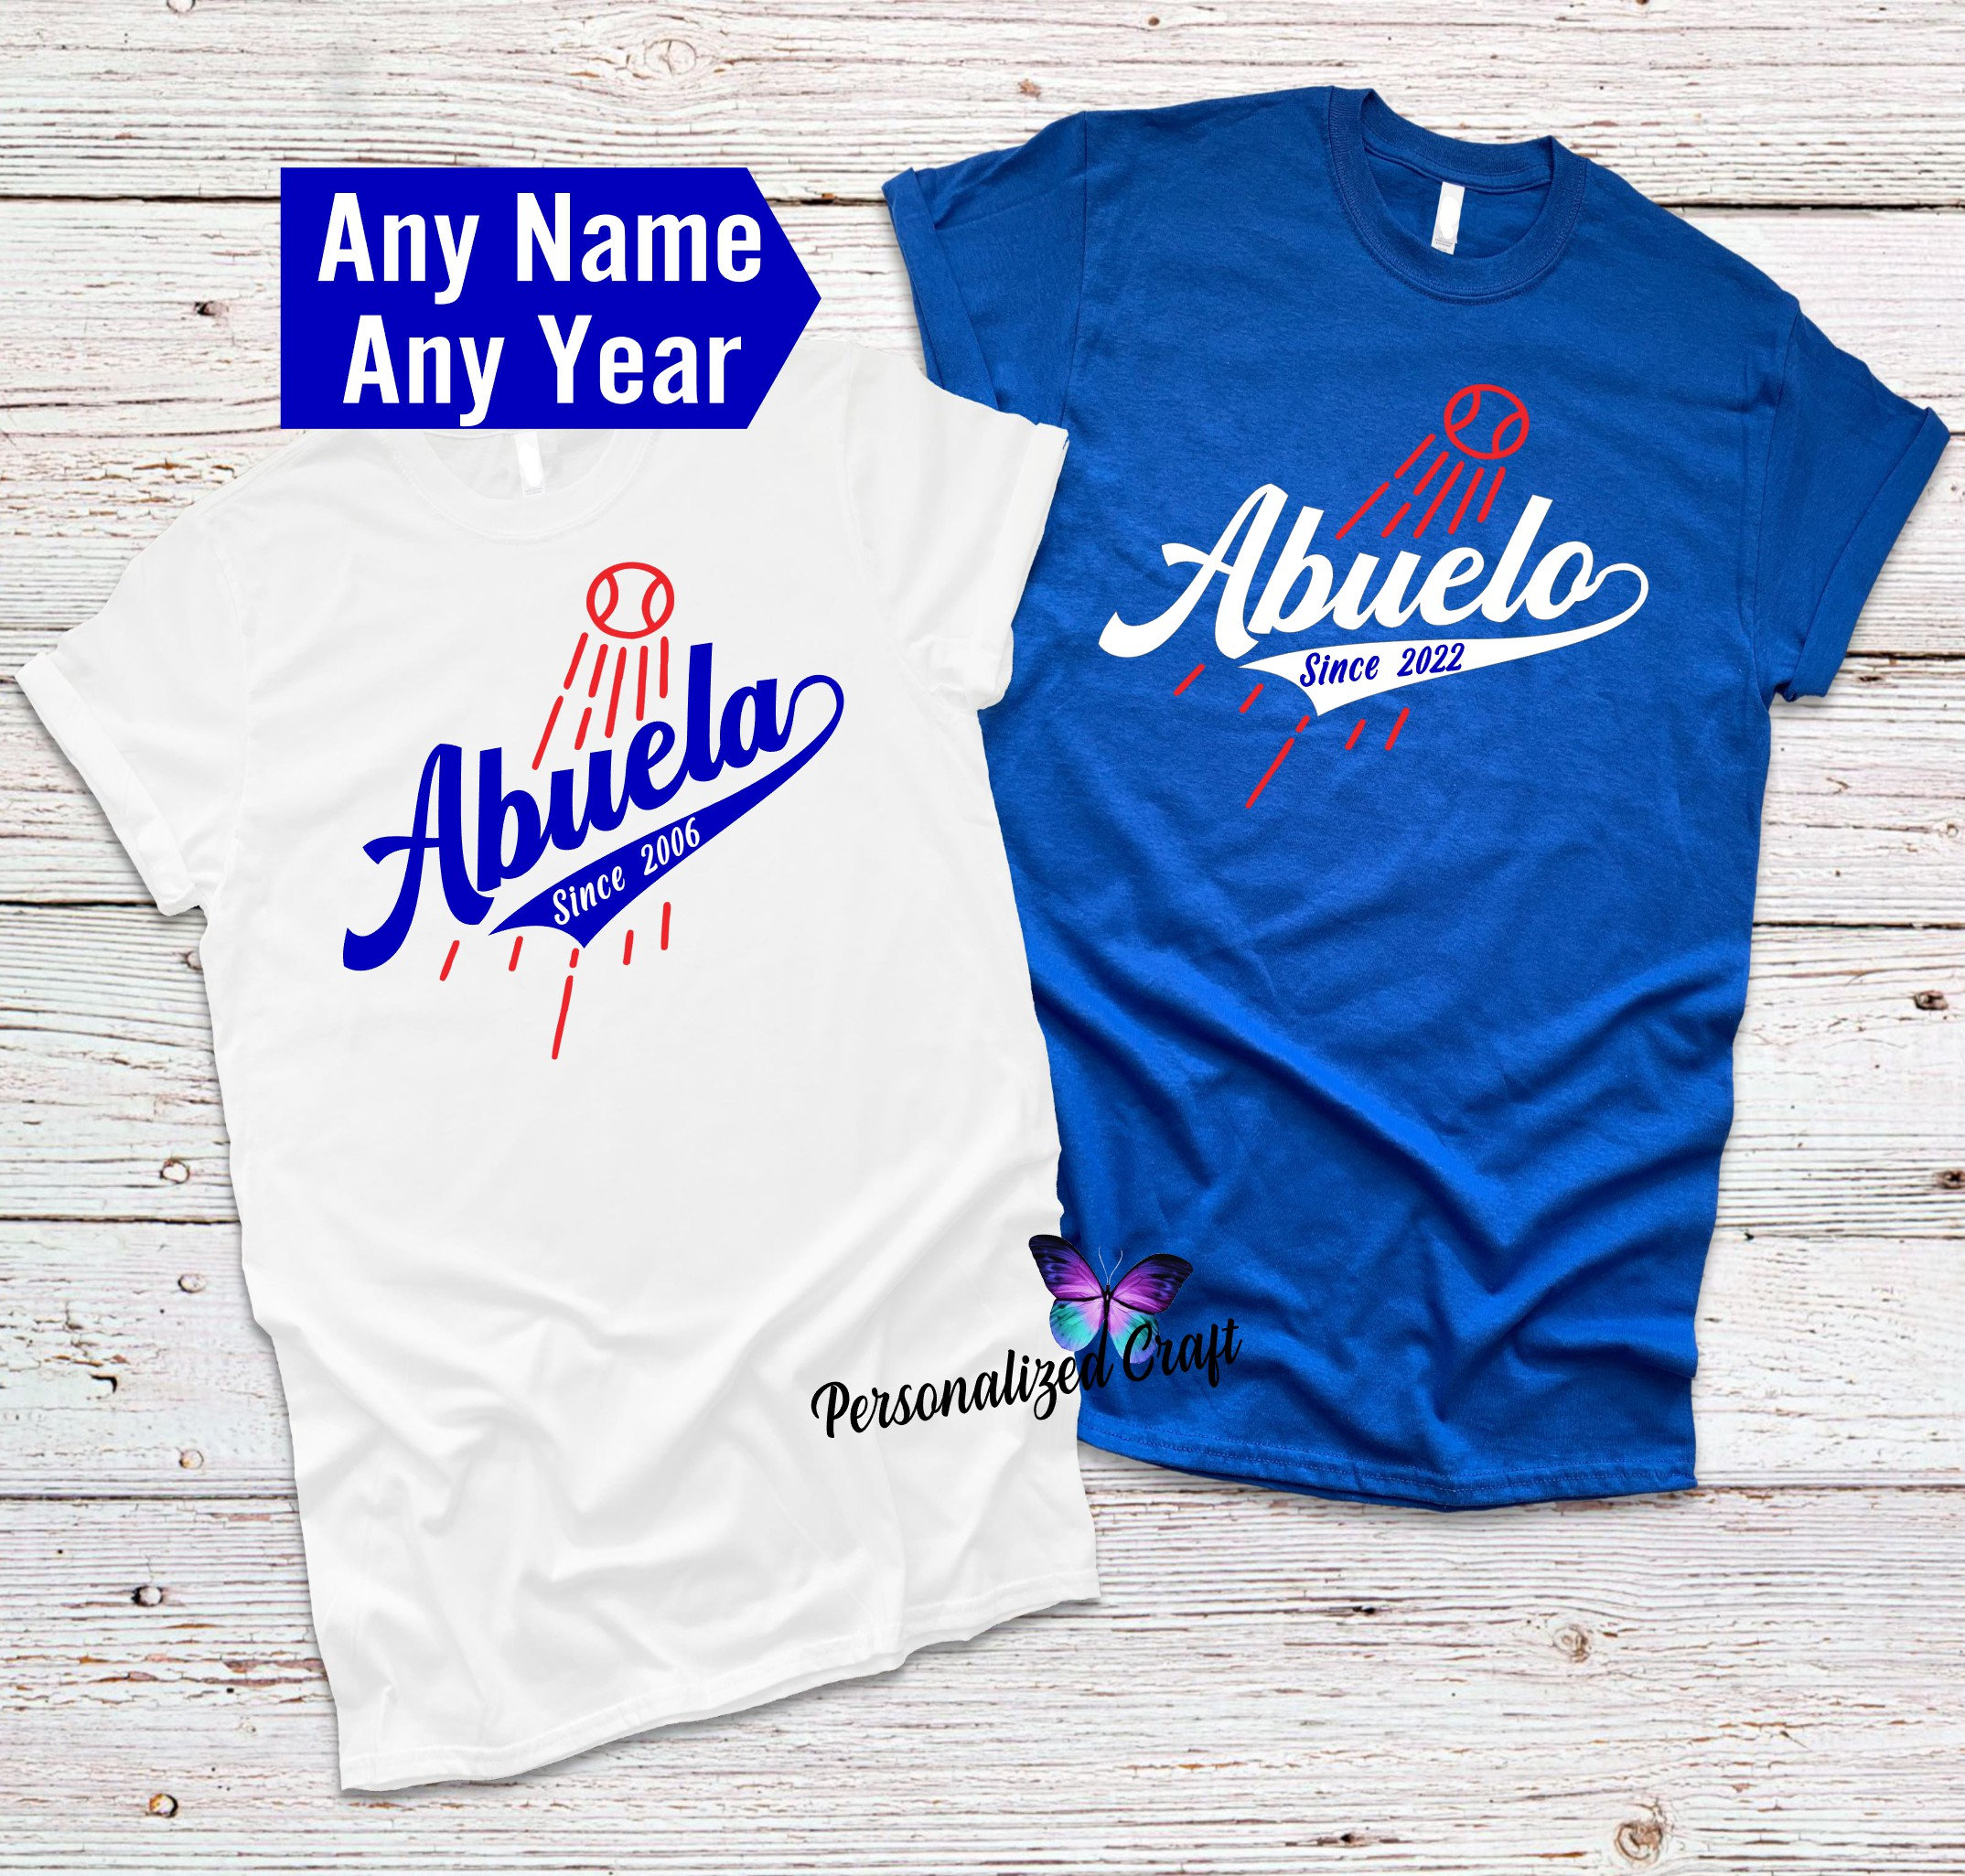 LA Dodgers Personalized Baby Jersey